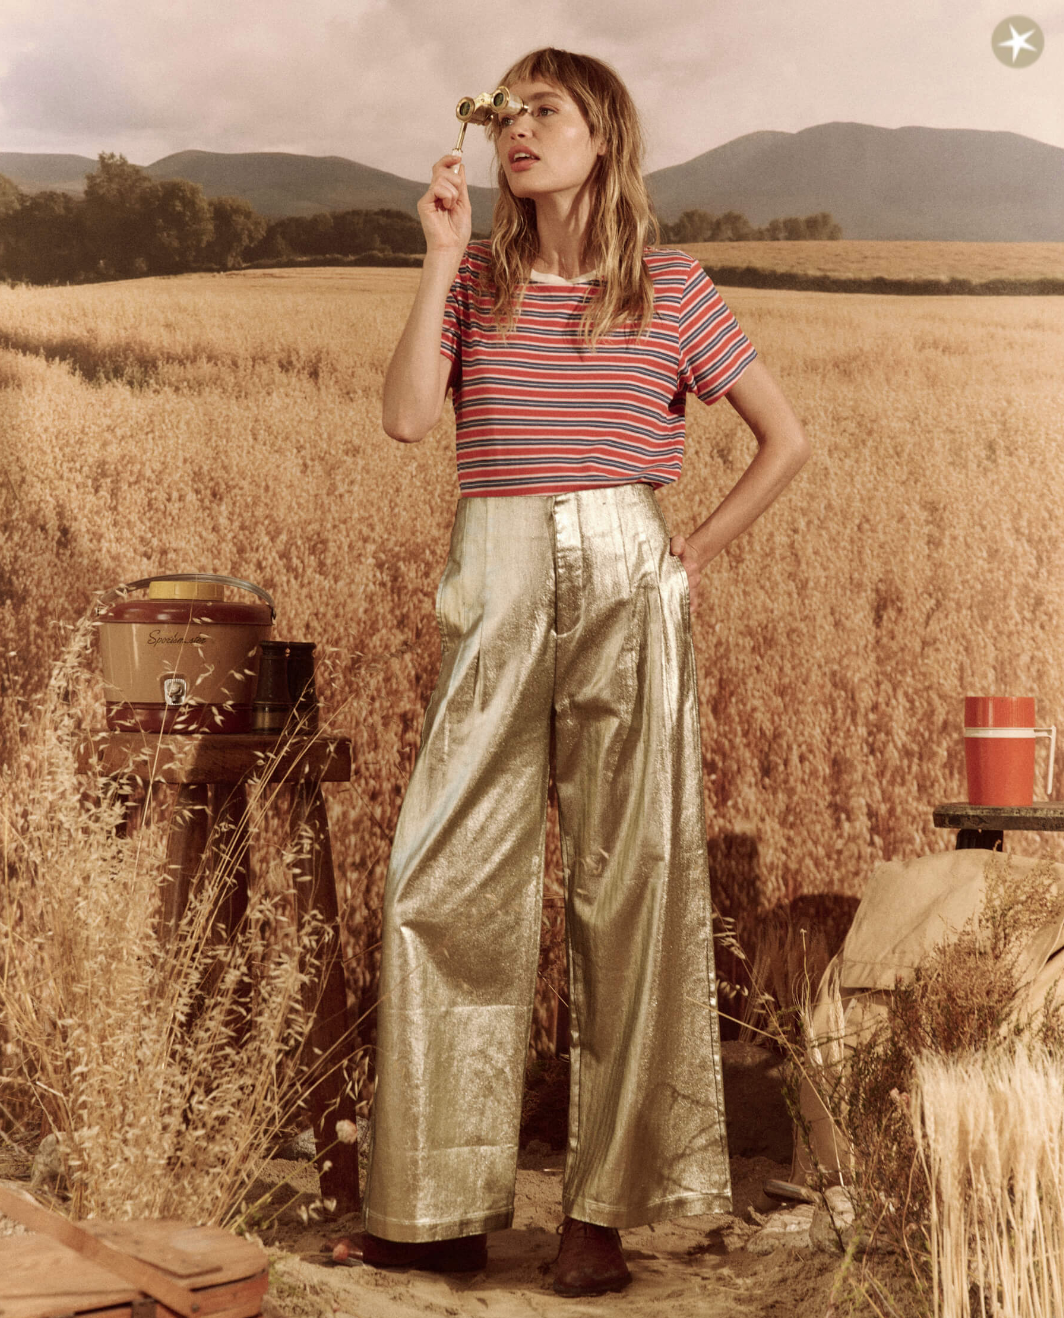 A woman with a short haircut, wearing a striped red and blue top and The Great Inc.&#39;s Sculpted Trouser, stands in an Arizona wheat field, looking through a monocle with a thoughtful expression.